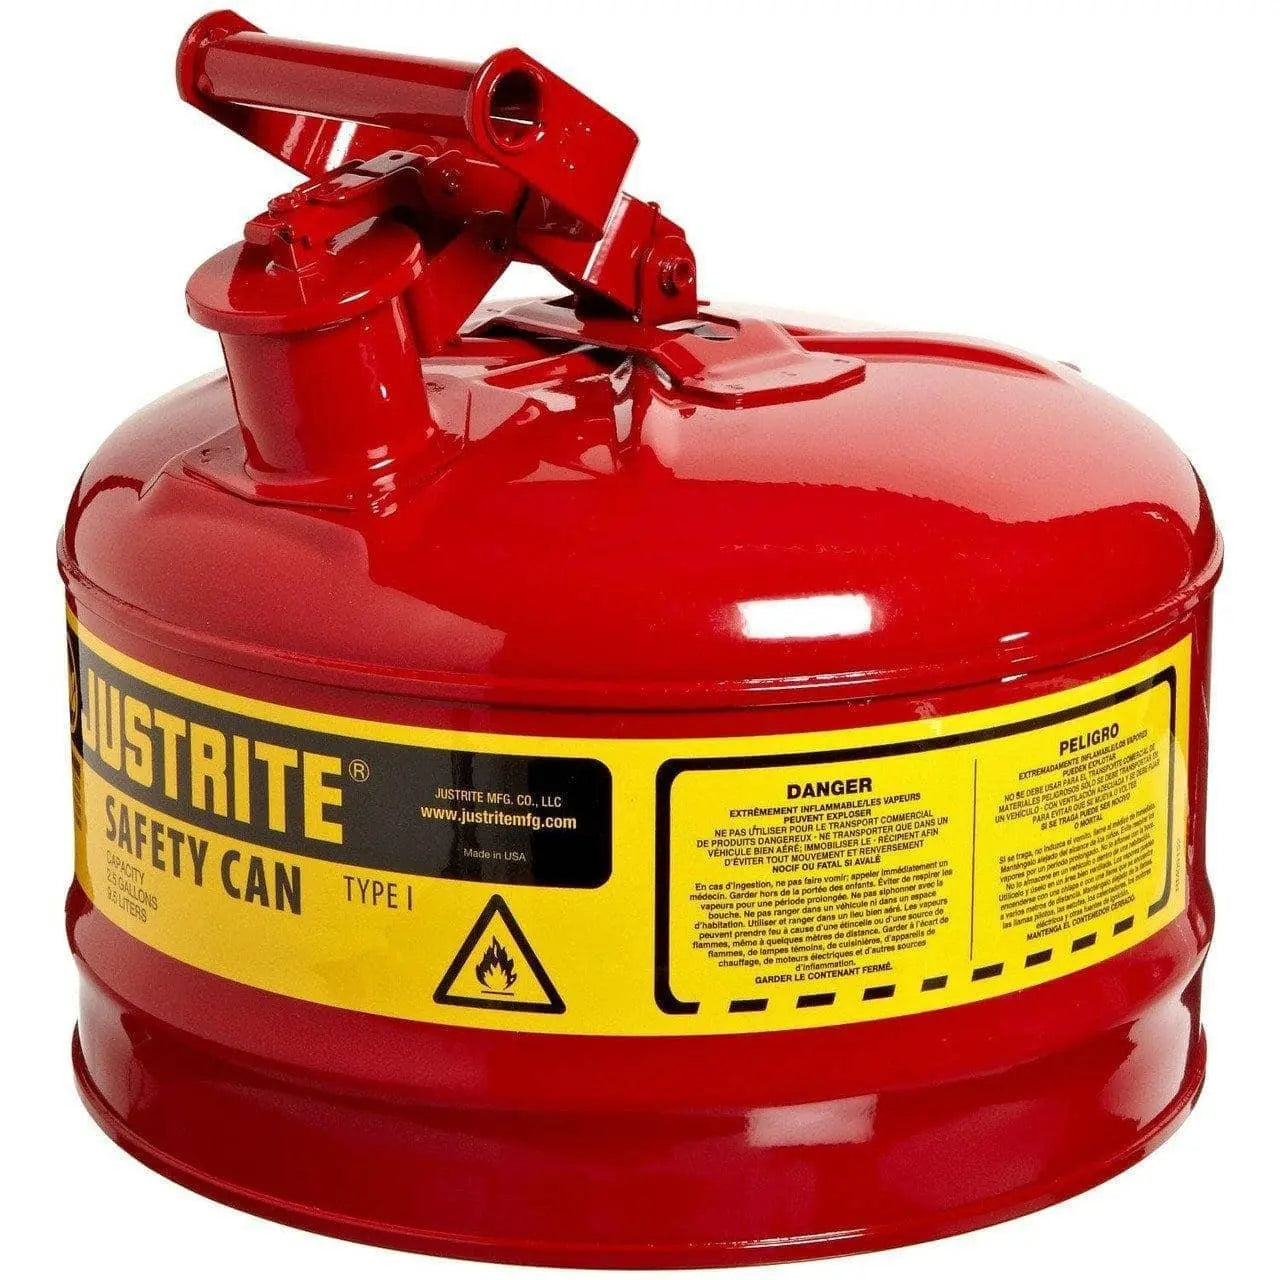 JUSTRITE - Type I Steel Safety Can 2.5 Gallon - Becker Safety and Supply